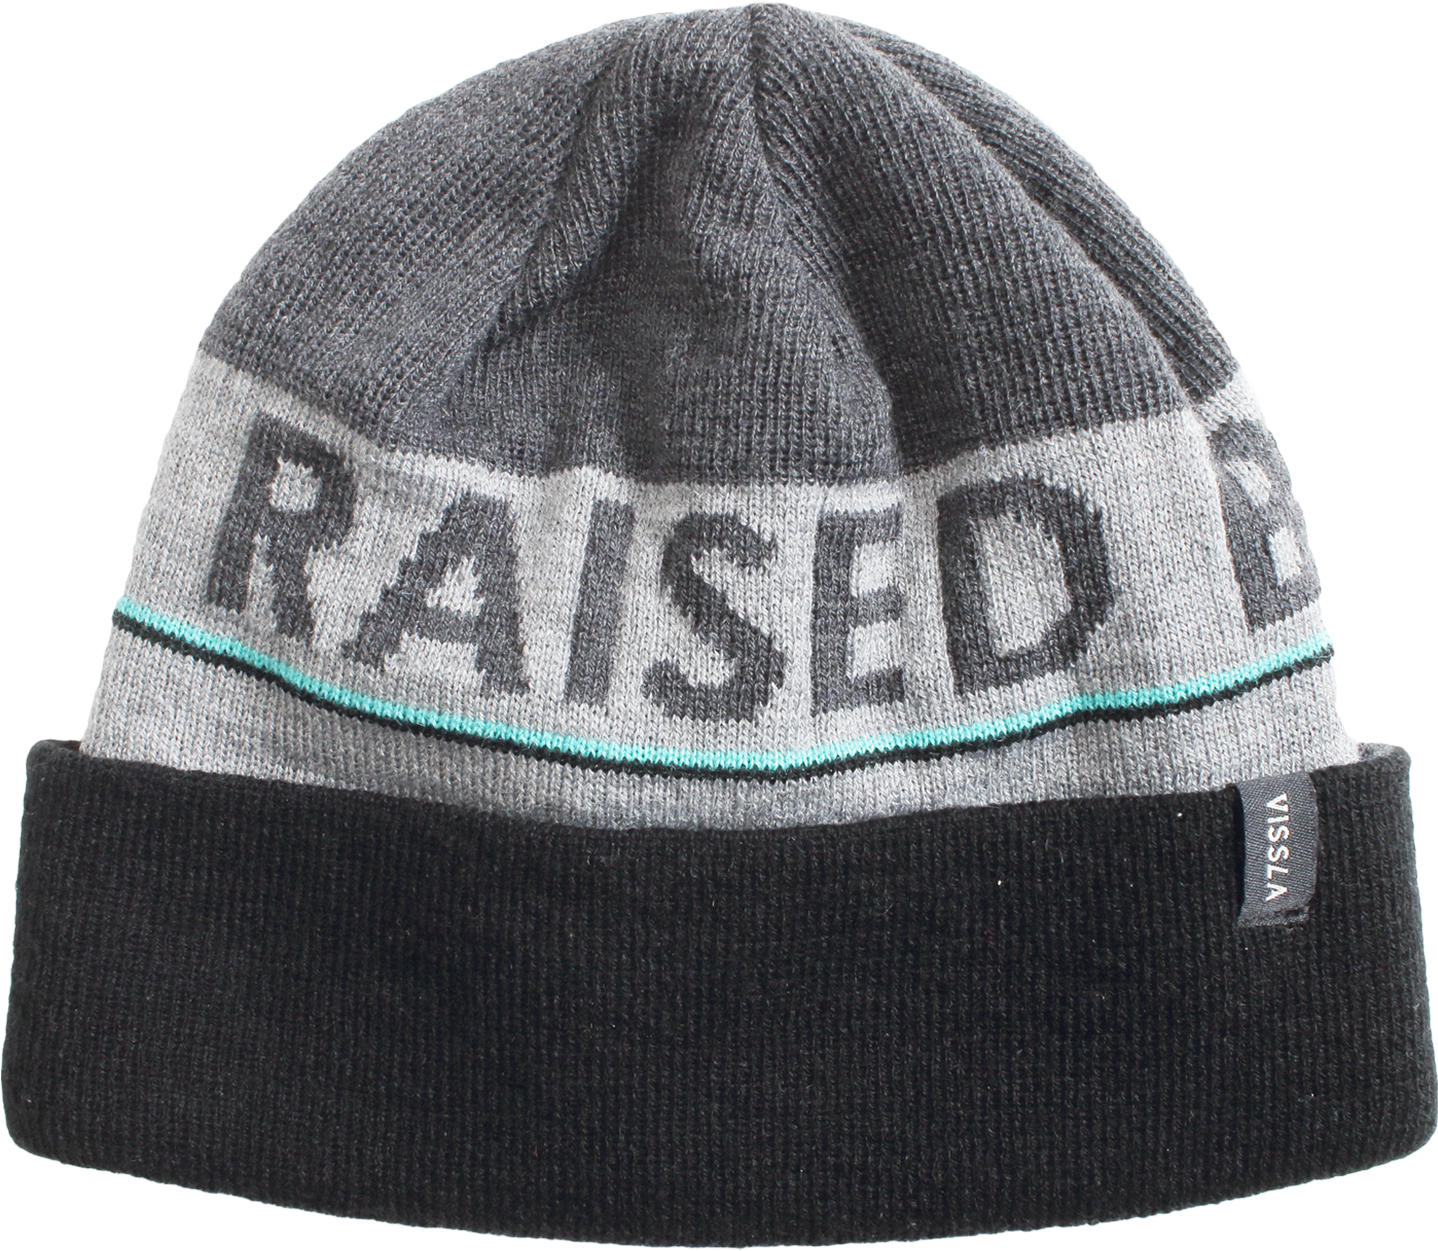 Raised Beanie Knit Hat PNG